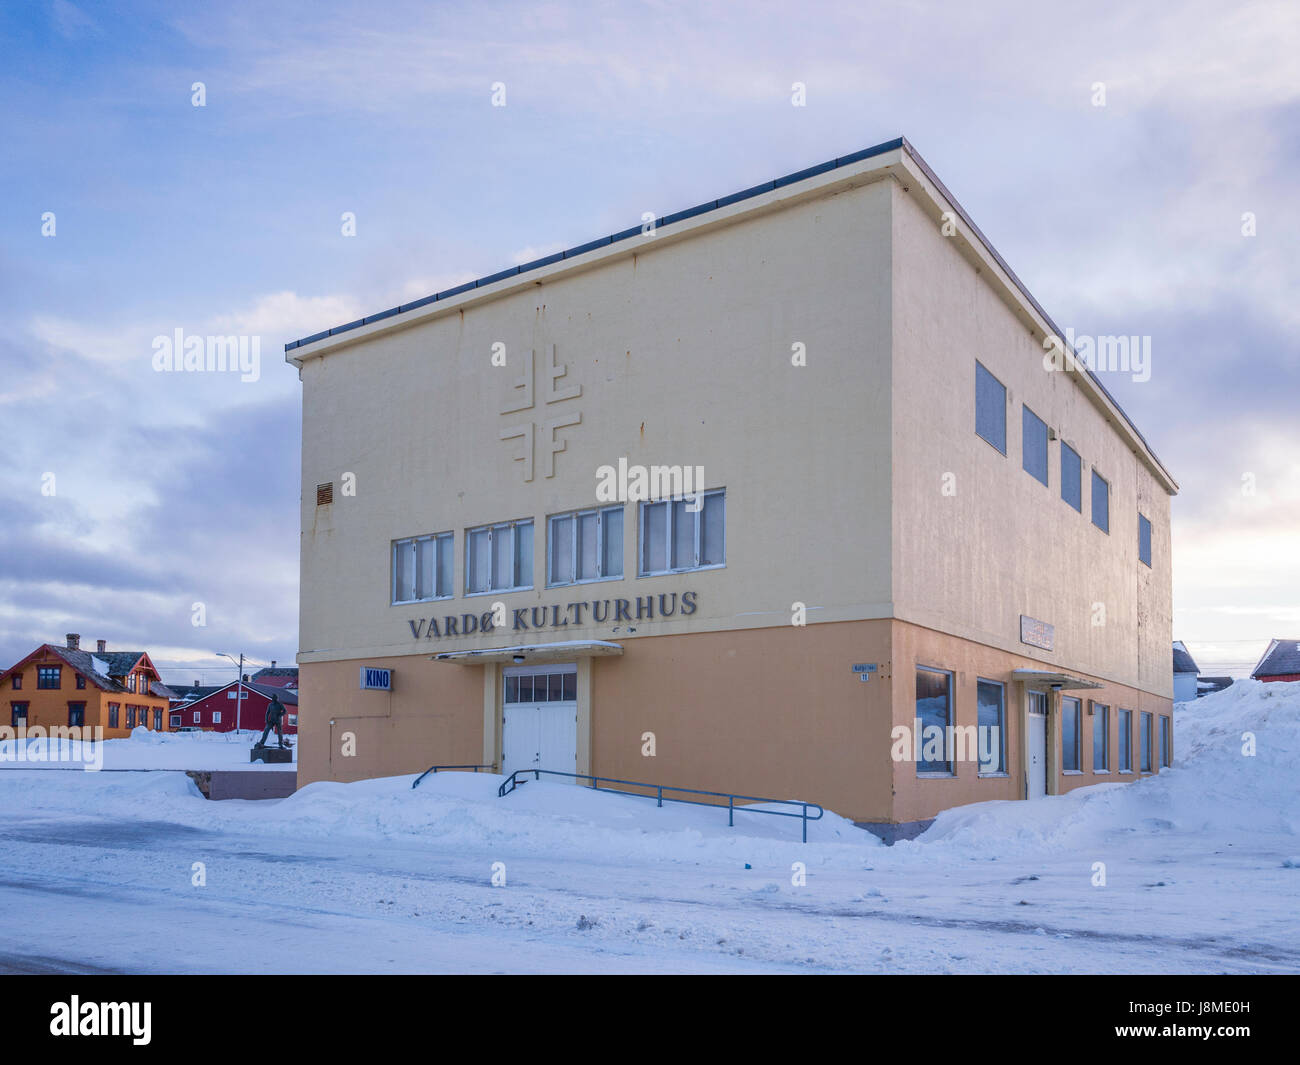 Vardø Kulturhus, a samll concert venue and cinema in Vardø, a town in Finnmark County in the far north-eastern part of Norway. Stock Photo